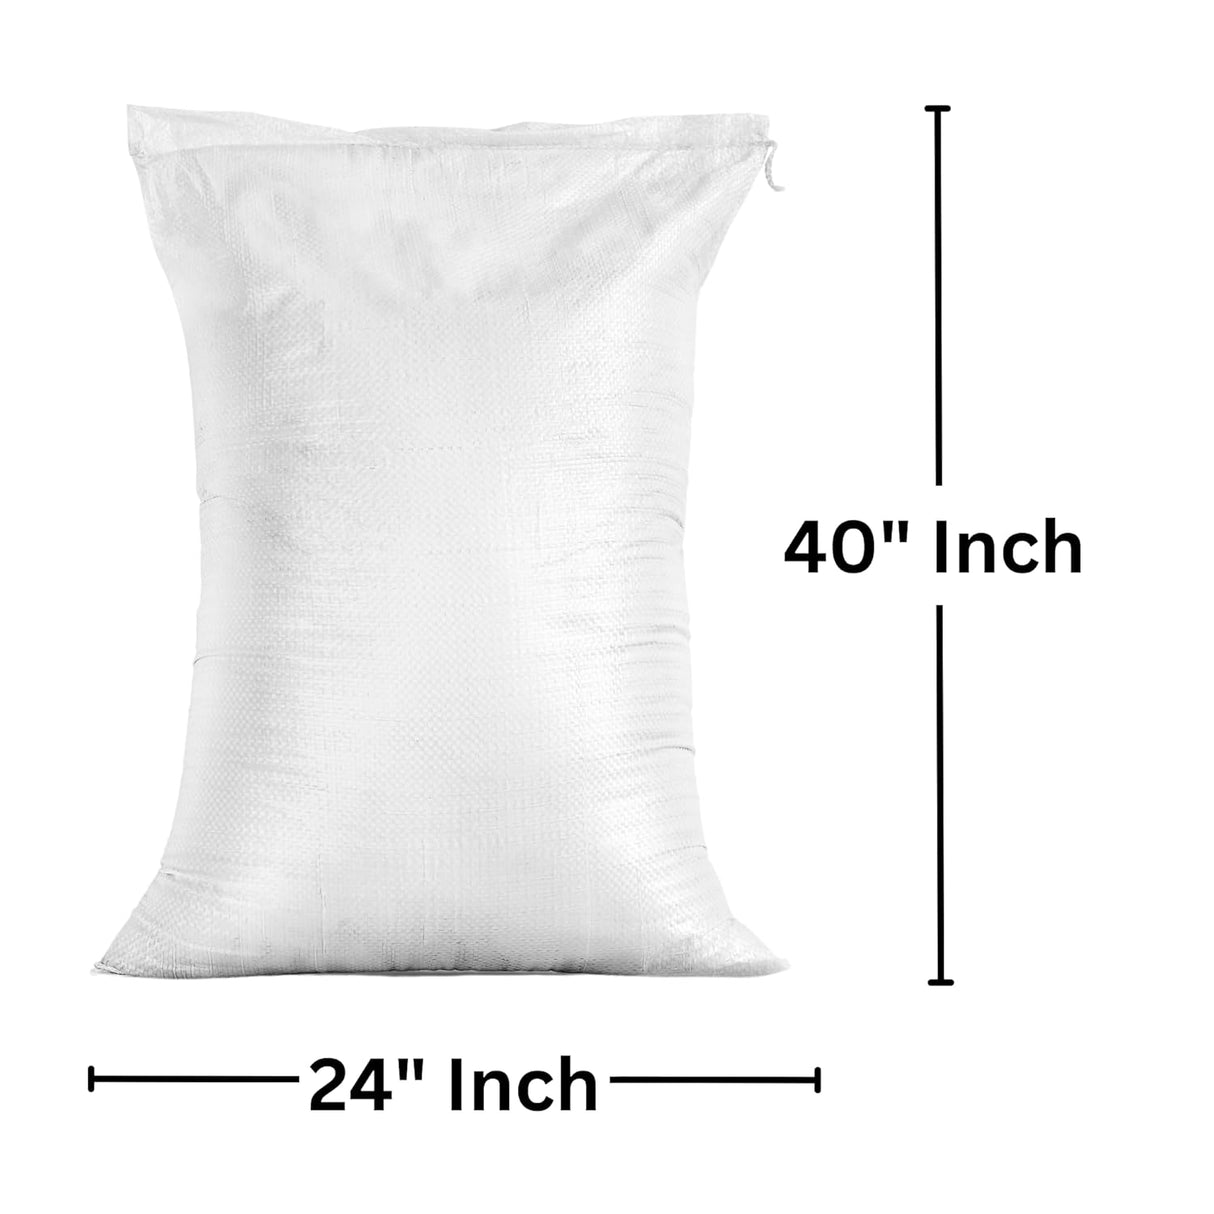 Singhal Empty HDPE White Bag, Bora 24×40 Inches Pack of 10, Bori for Packing of Food, vegetables, Grains, Wheat, Rice, Sugar, etc Products, Set of 10 Pieces